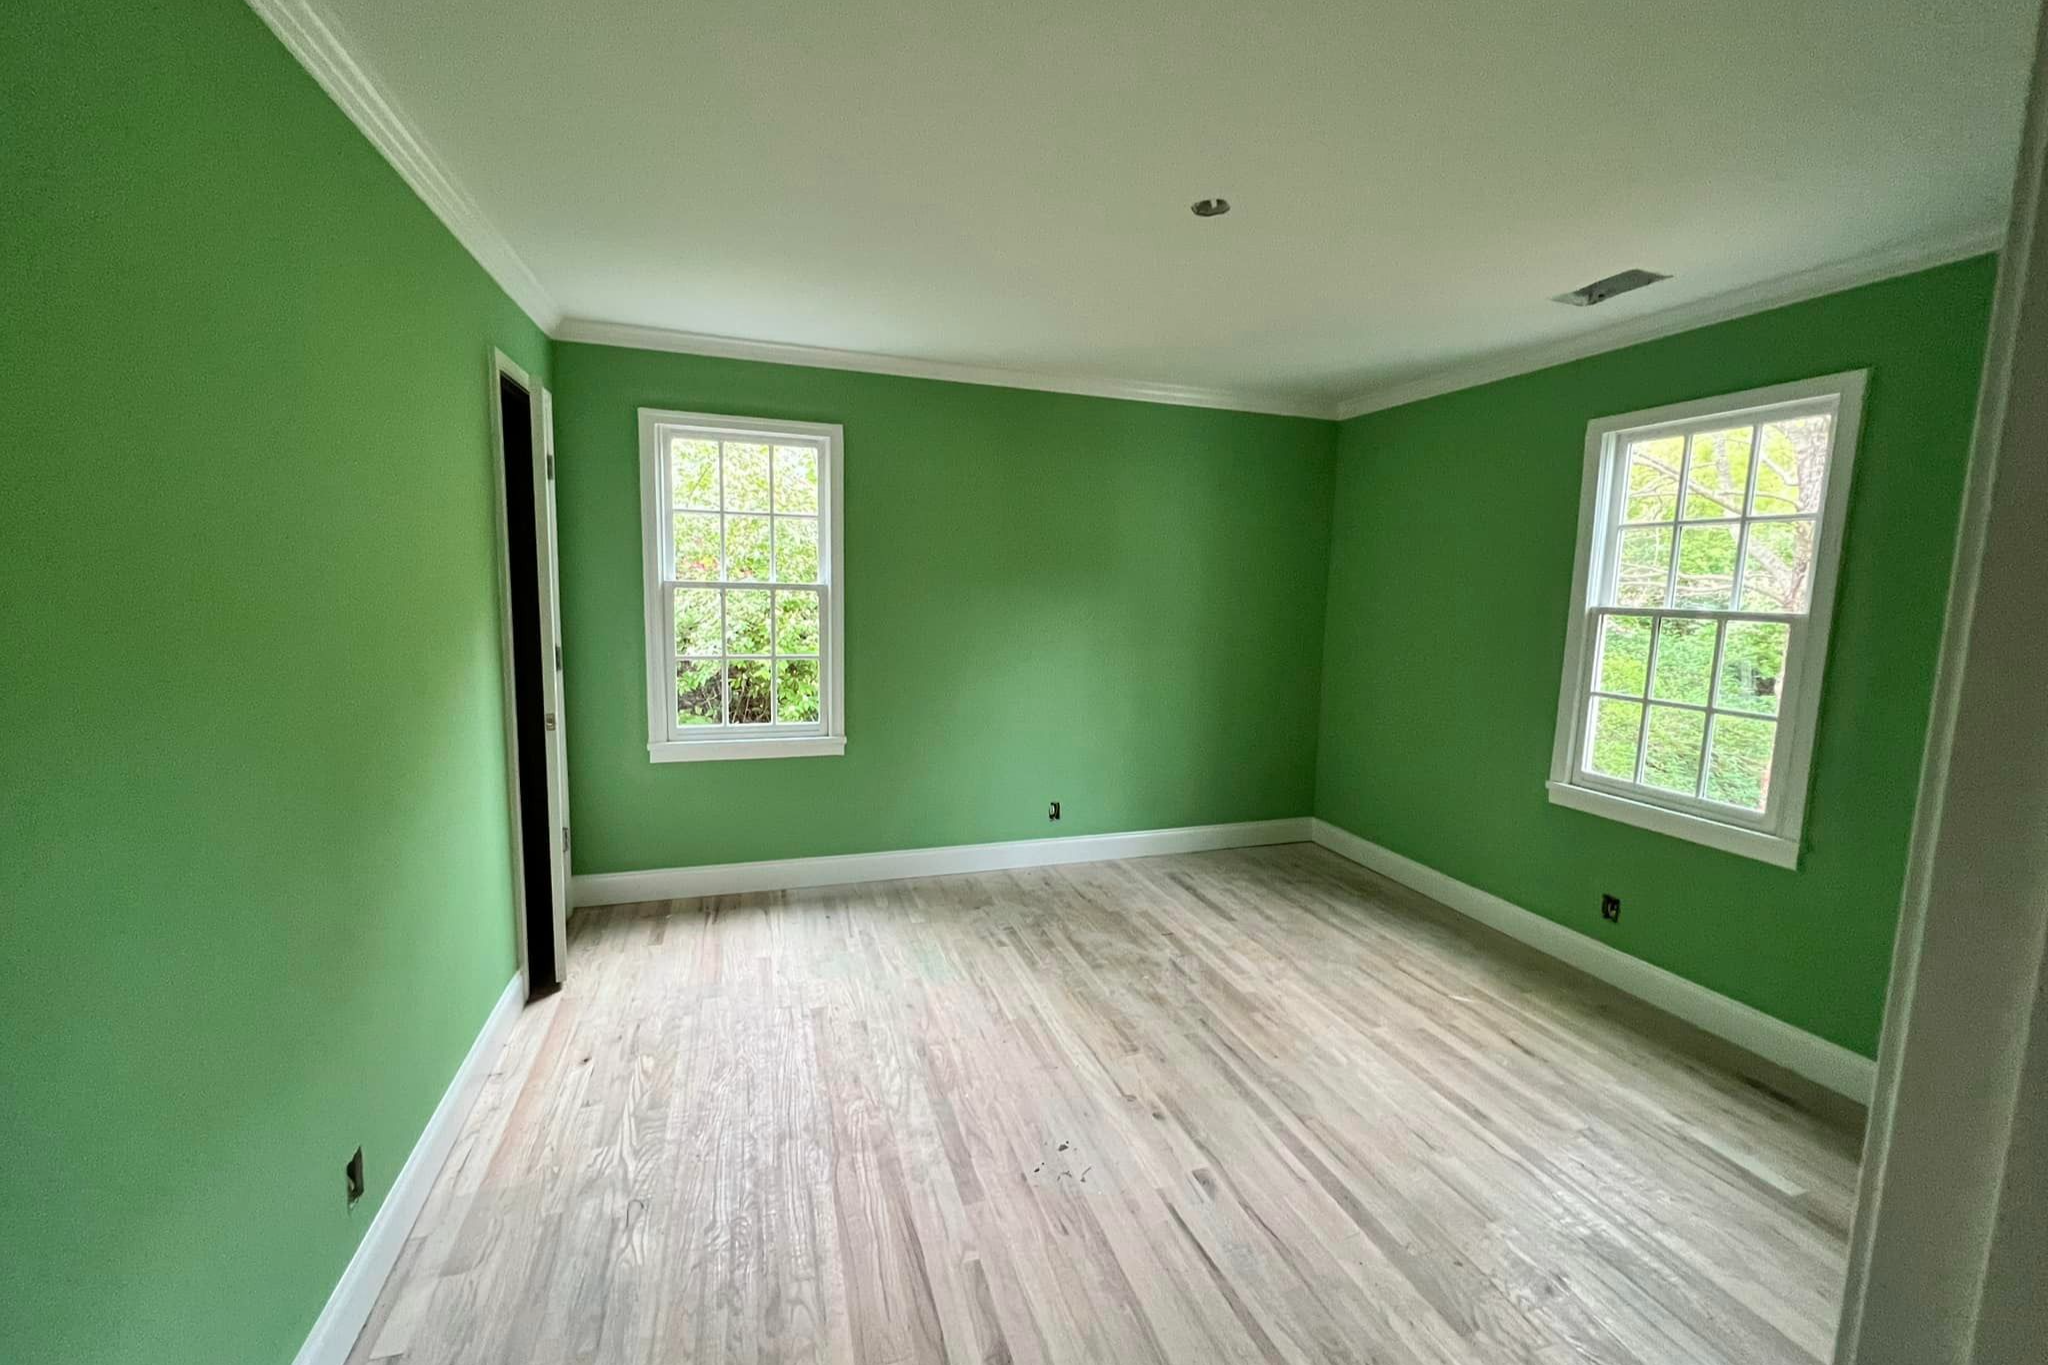 Interior Painting for Ang Painting LLC in Athens, GA